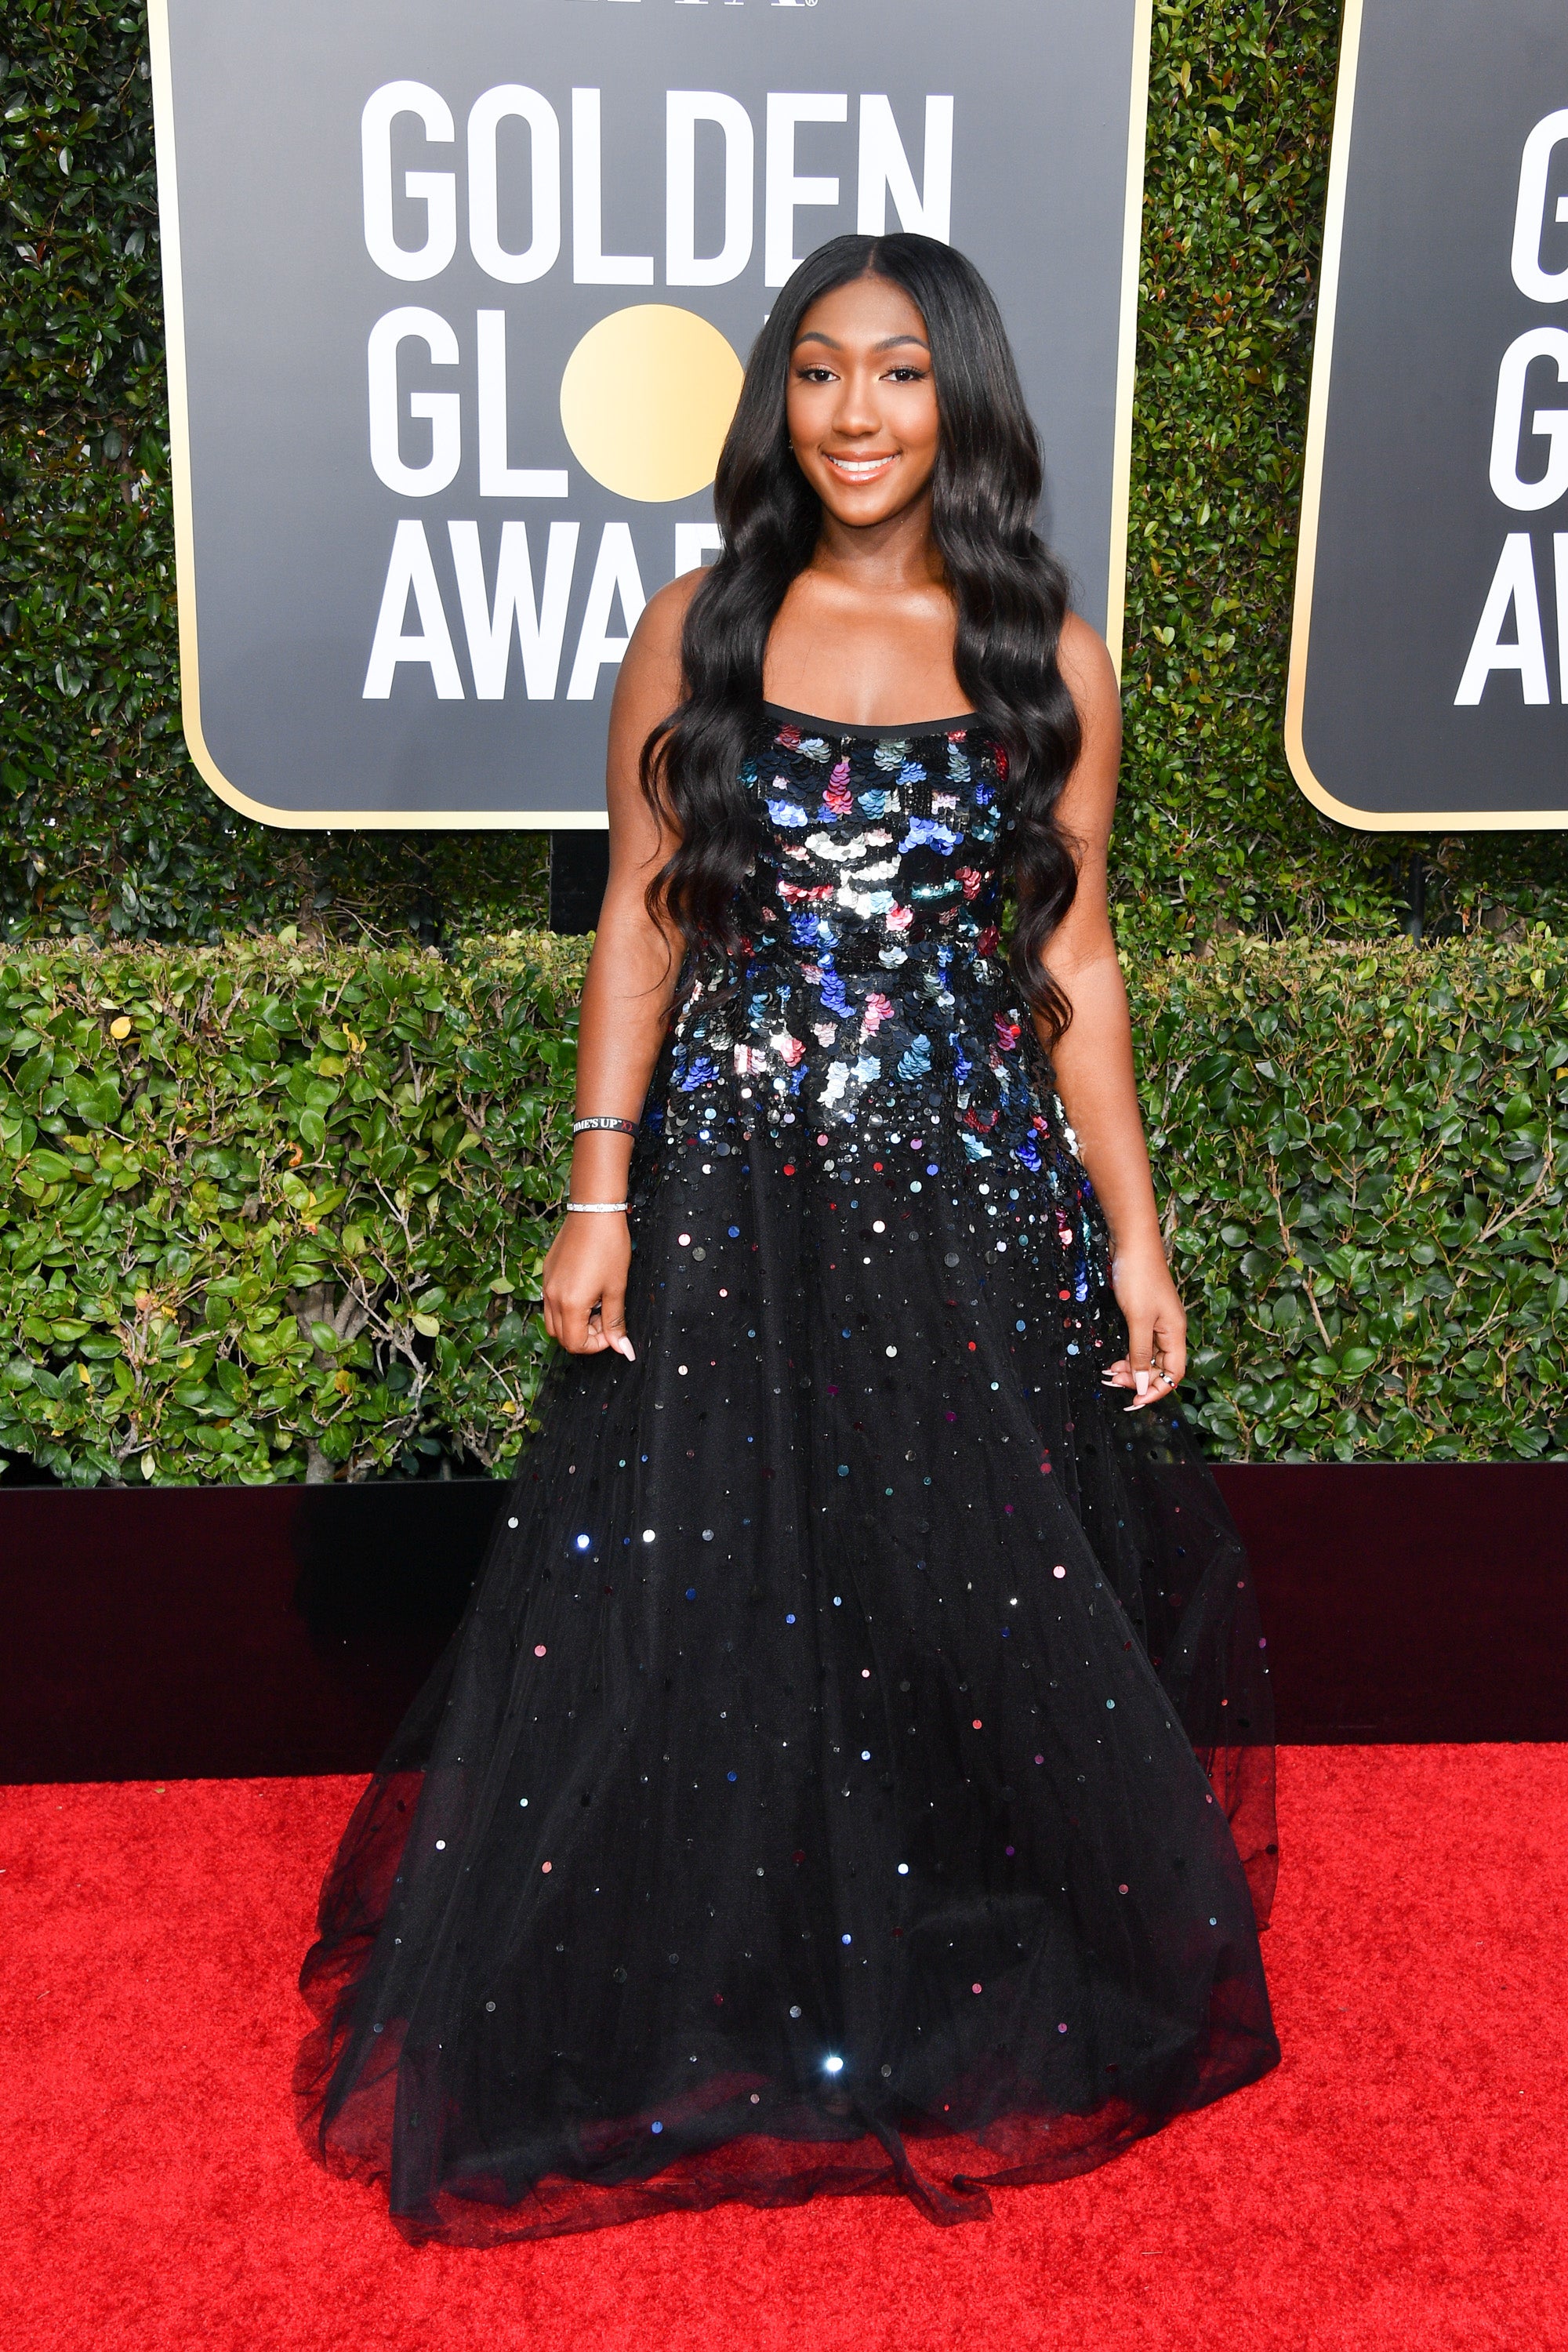 The Best 2019 Golden Globes Fashion Moments